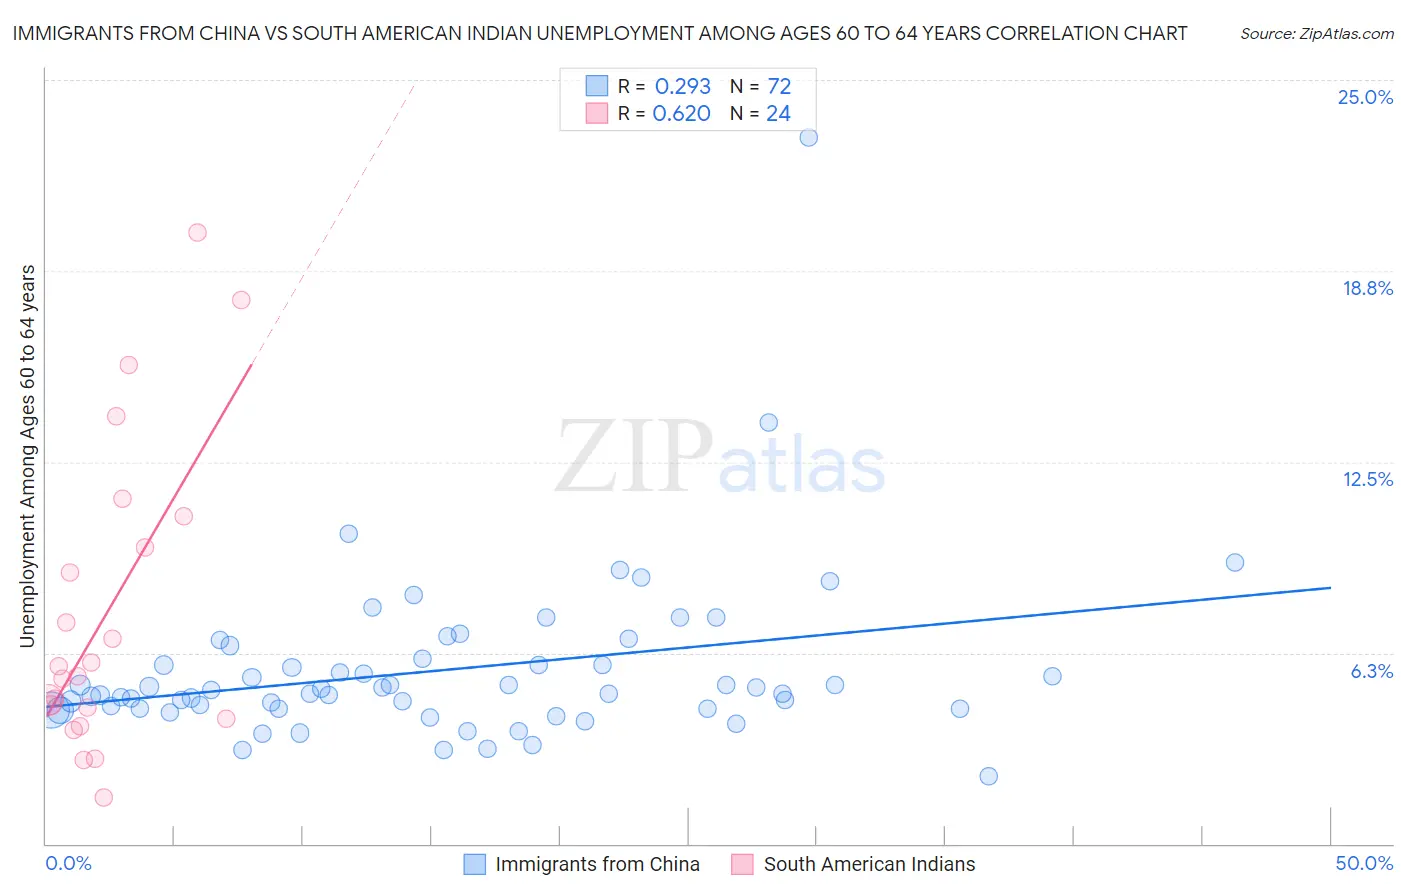 Immigrants from China vs South American Indian Unemployment Among Ages 60 to 64 years